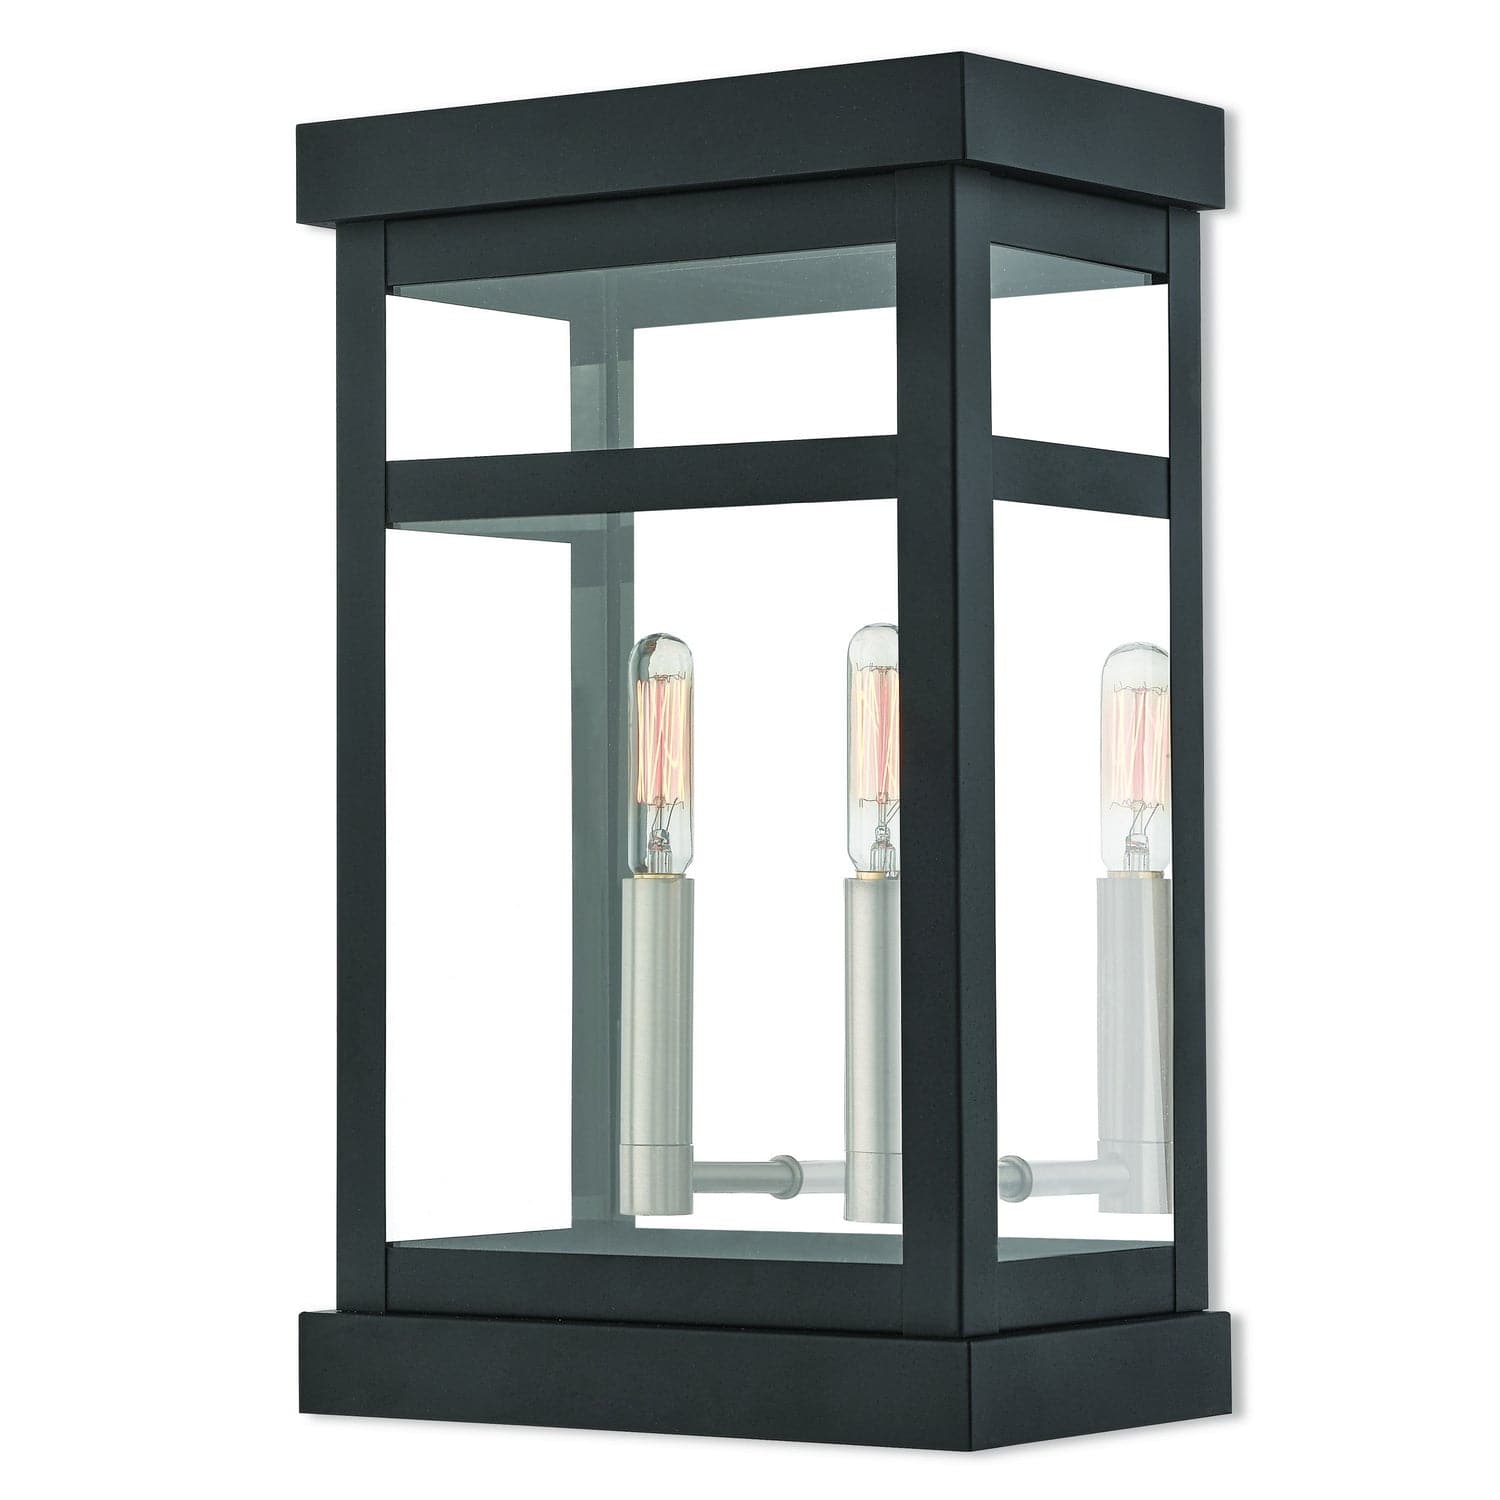 Livex Lighting - 20705-04 - Two Light Outdoor Wall Lantern - Hopewell - Black w/ Brushed Nickel Cluster and Polished Chrome Stainless Steel